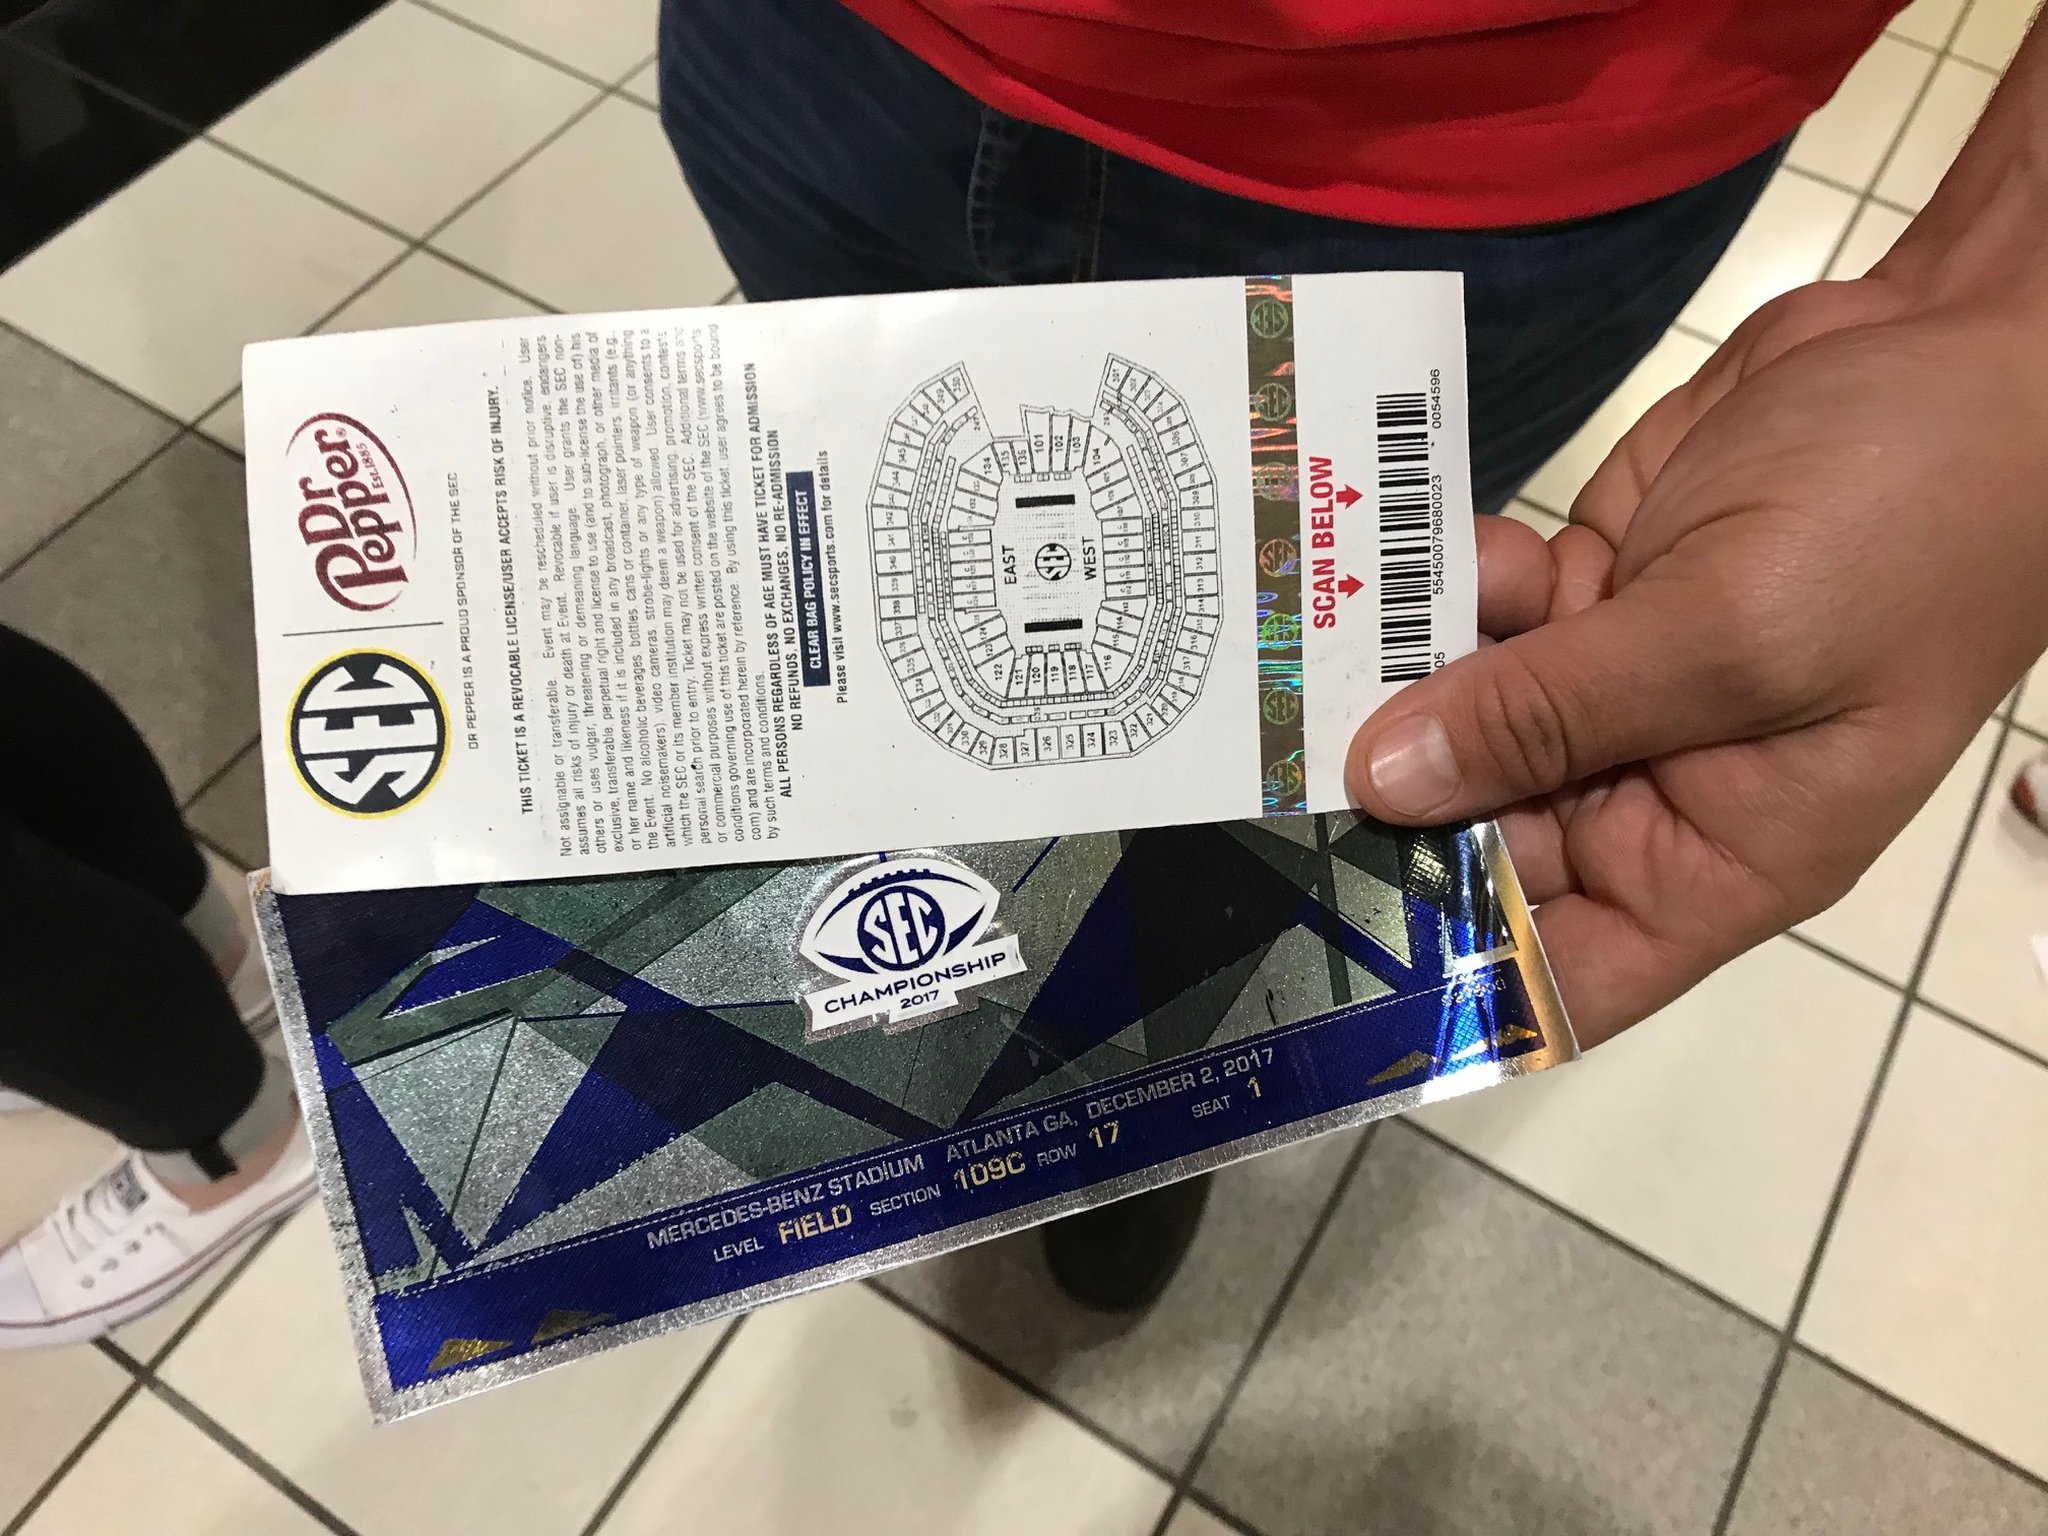 Watch out for counterfeit playoff tickets